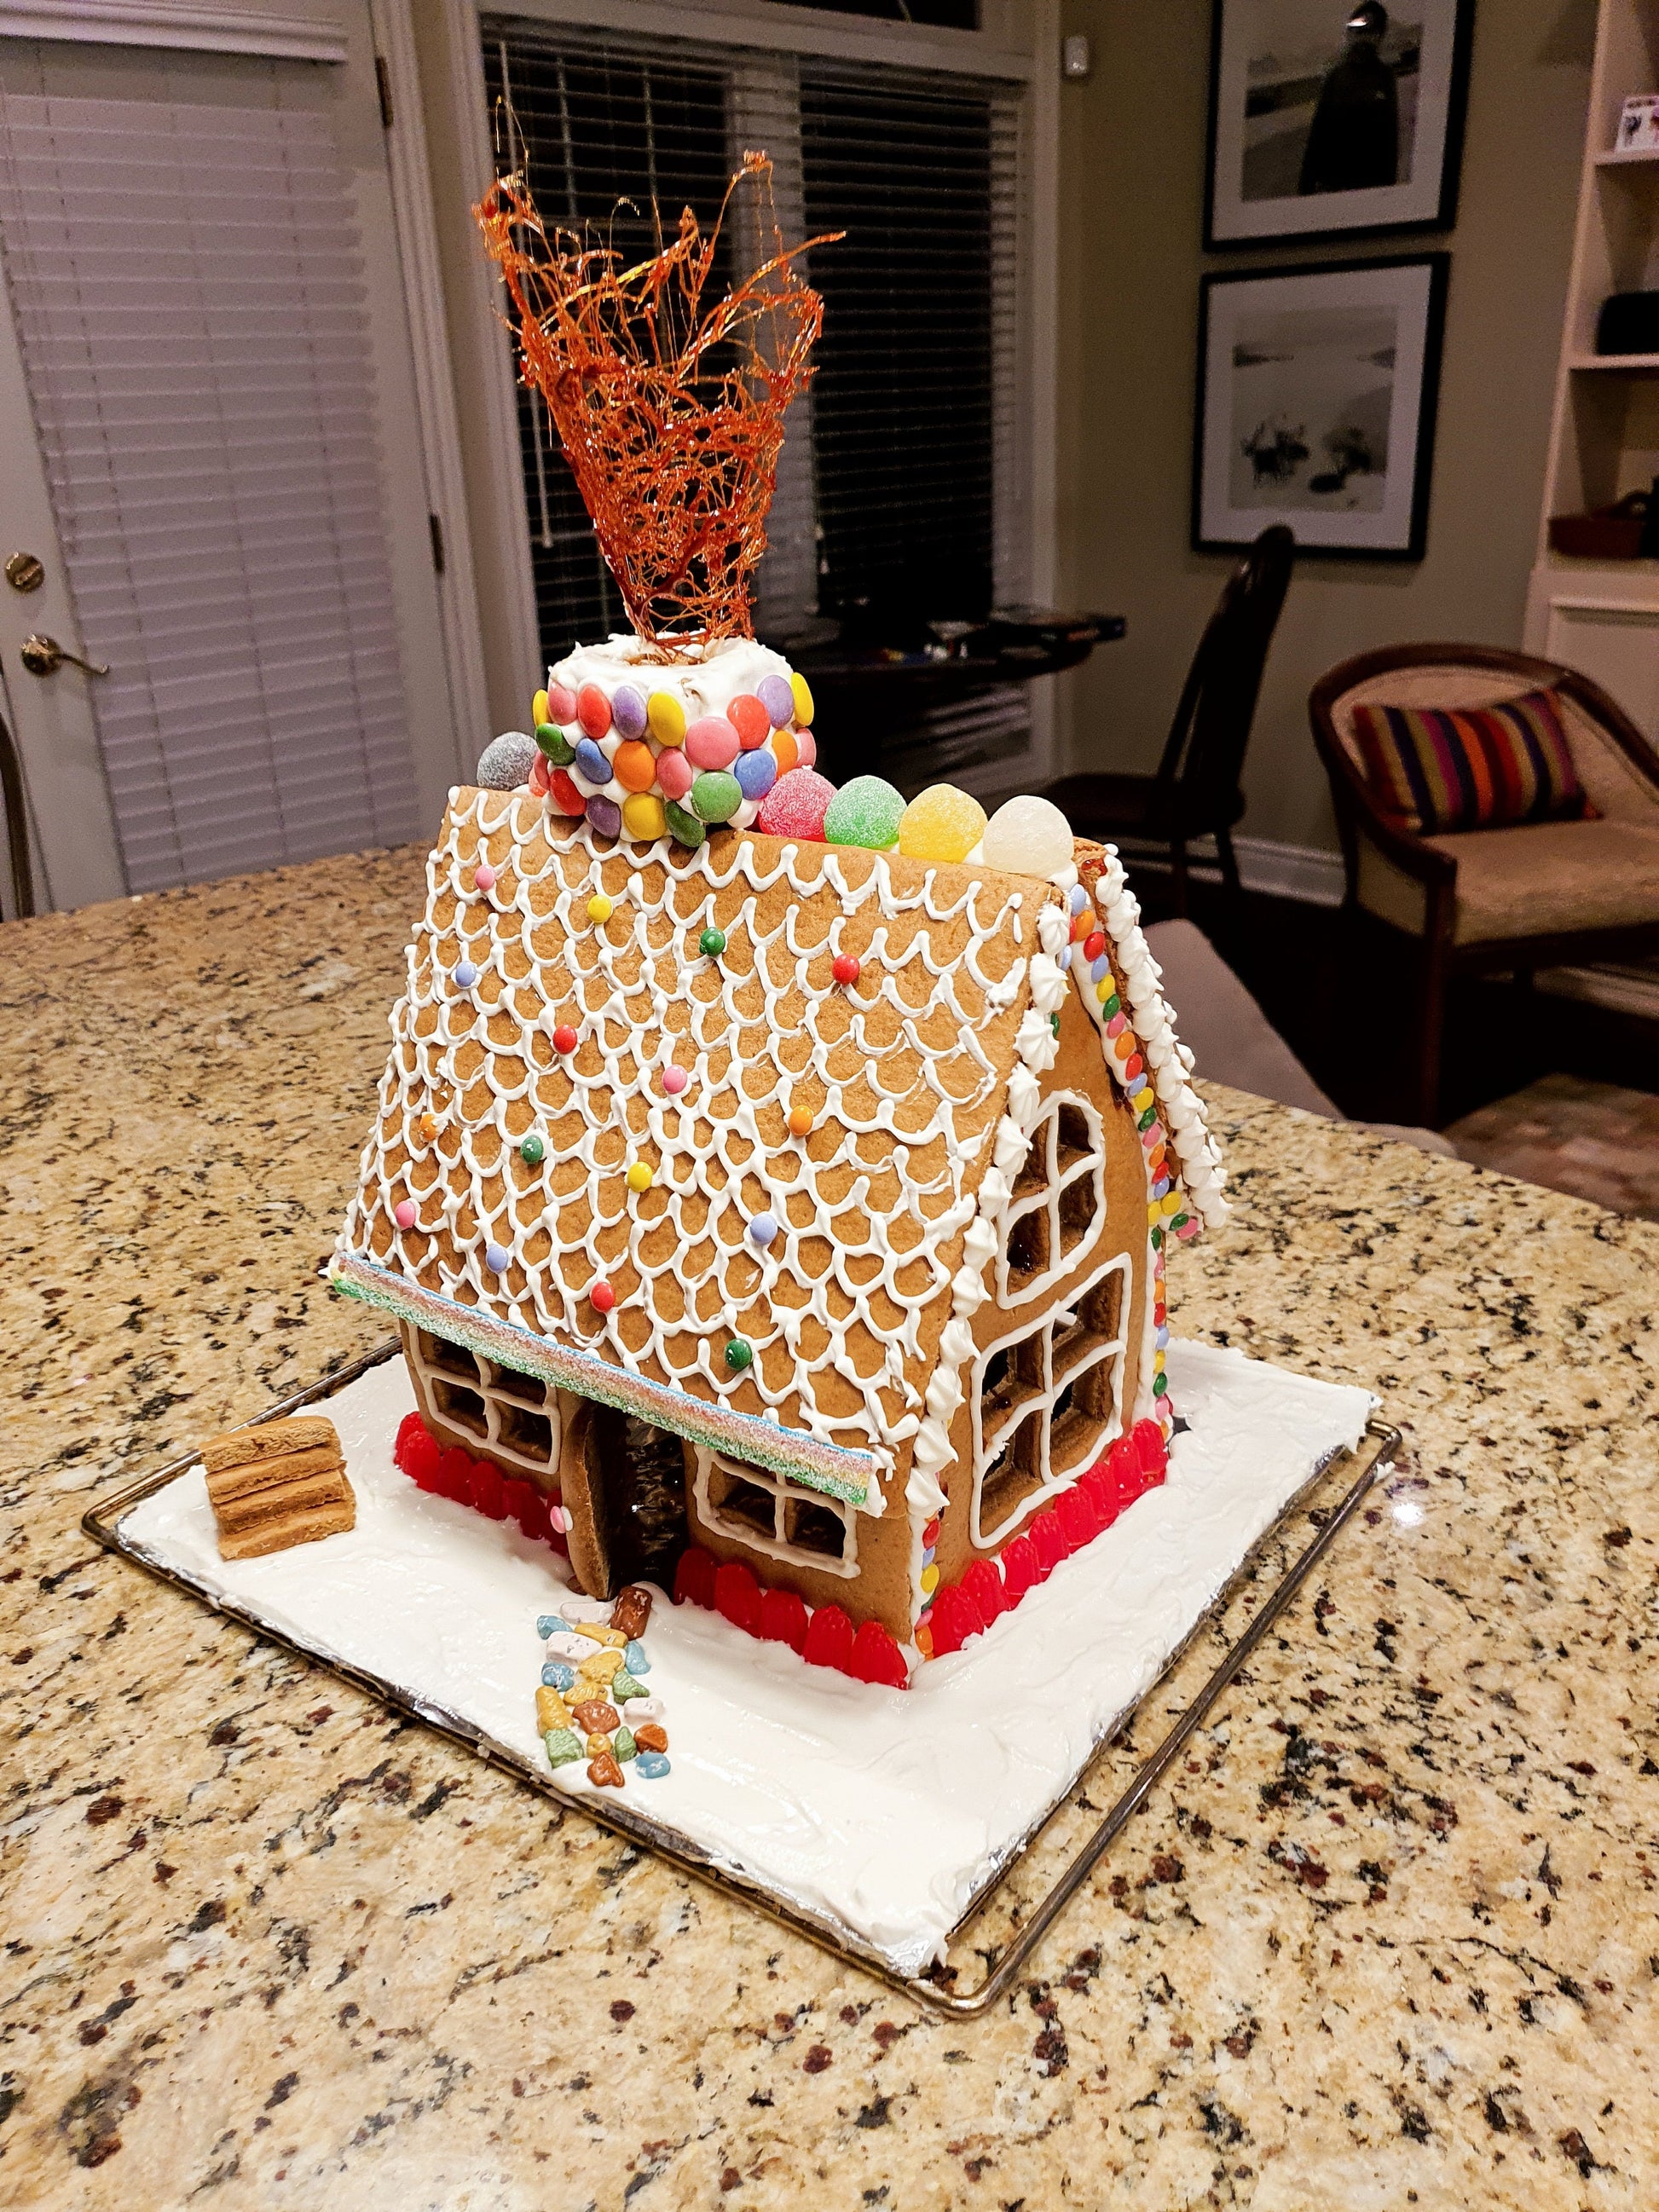 Christmas Gingerbread House Pattern - Large (11.5" x 9" x 6.5"). Gingerbread House Patterns, Recipes, Tips & Tricks In One Complete Package